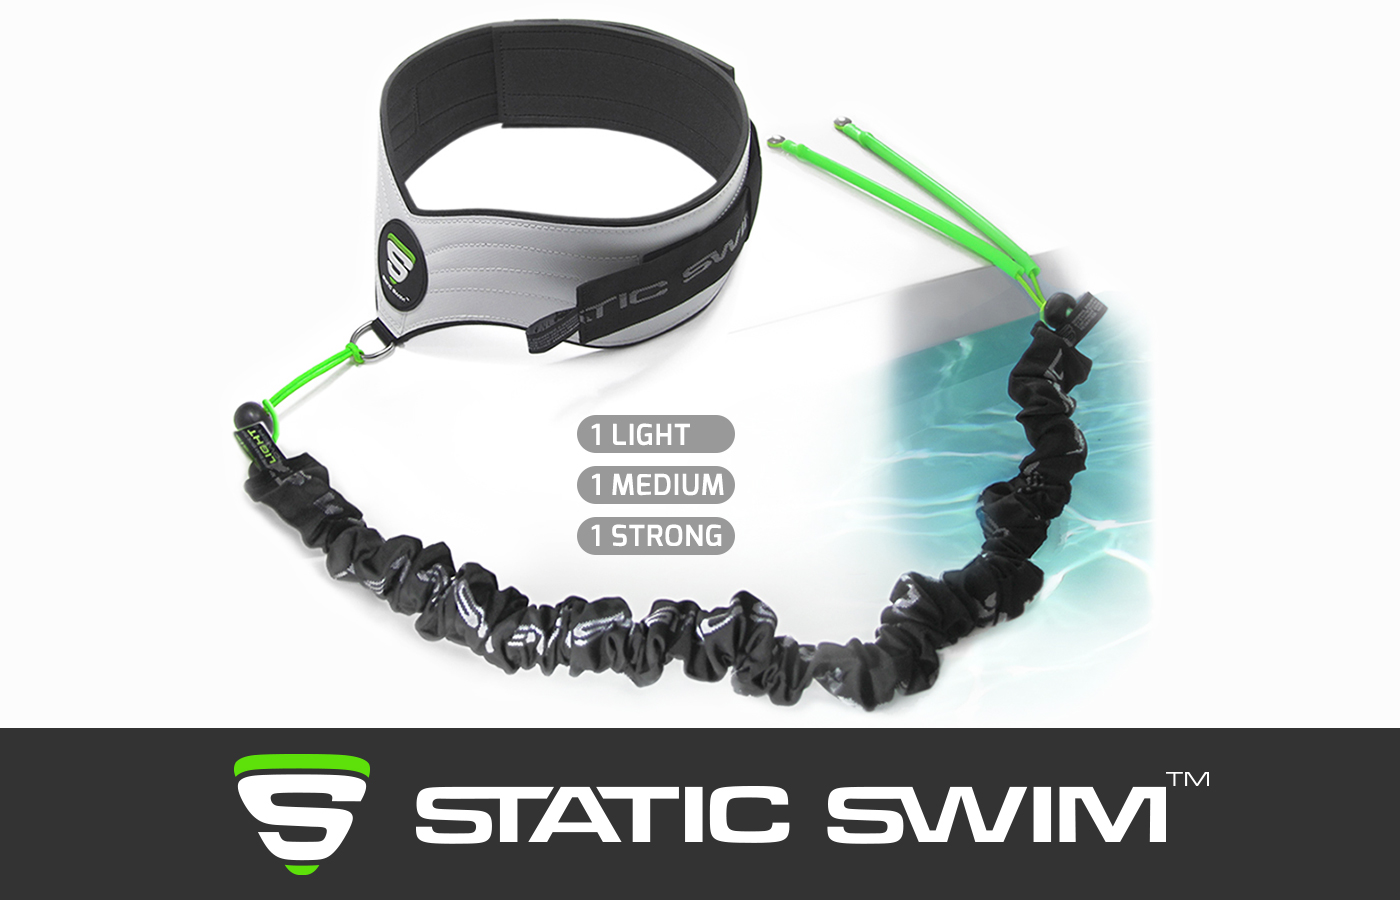 STATIC SWIM™'s swimming harness and resistance band with Solid Pool Decks attachment